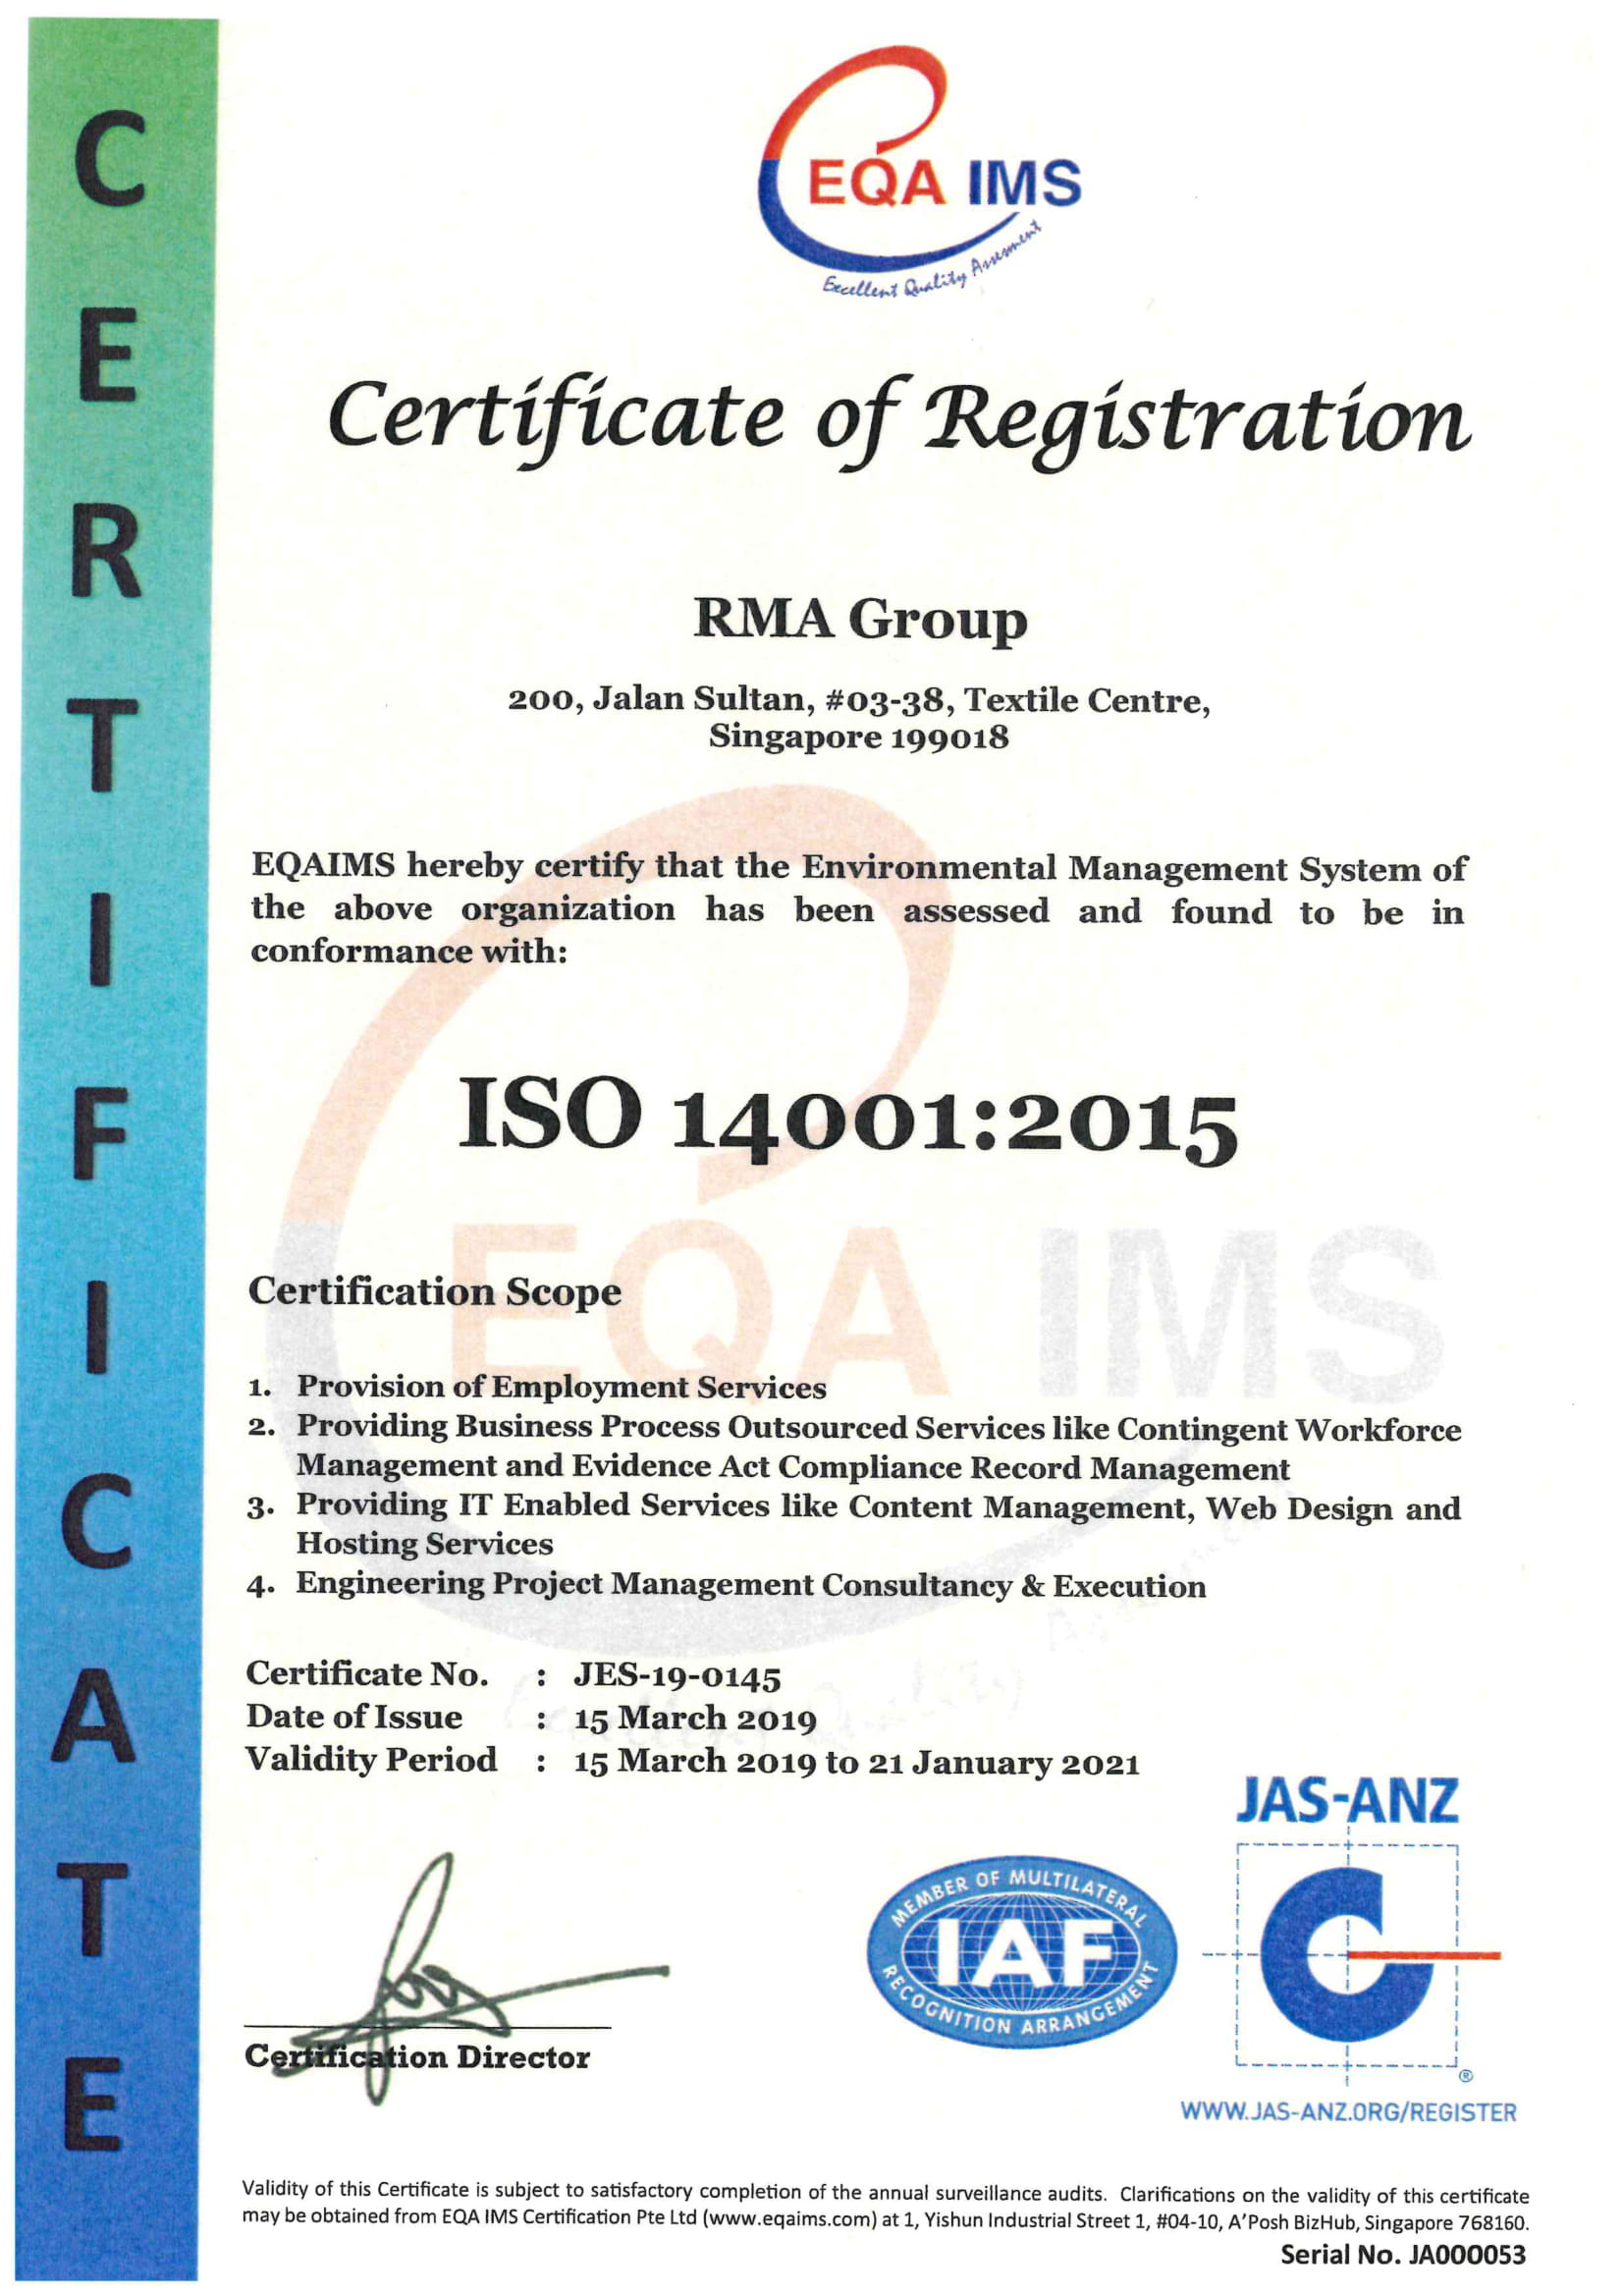 ISO 14001:2015 Certificate for Environmental Management System.